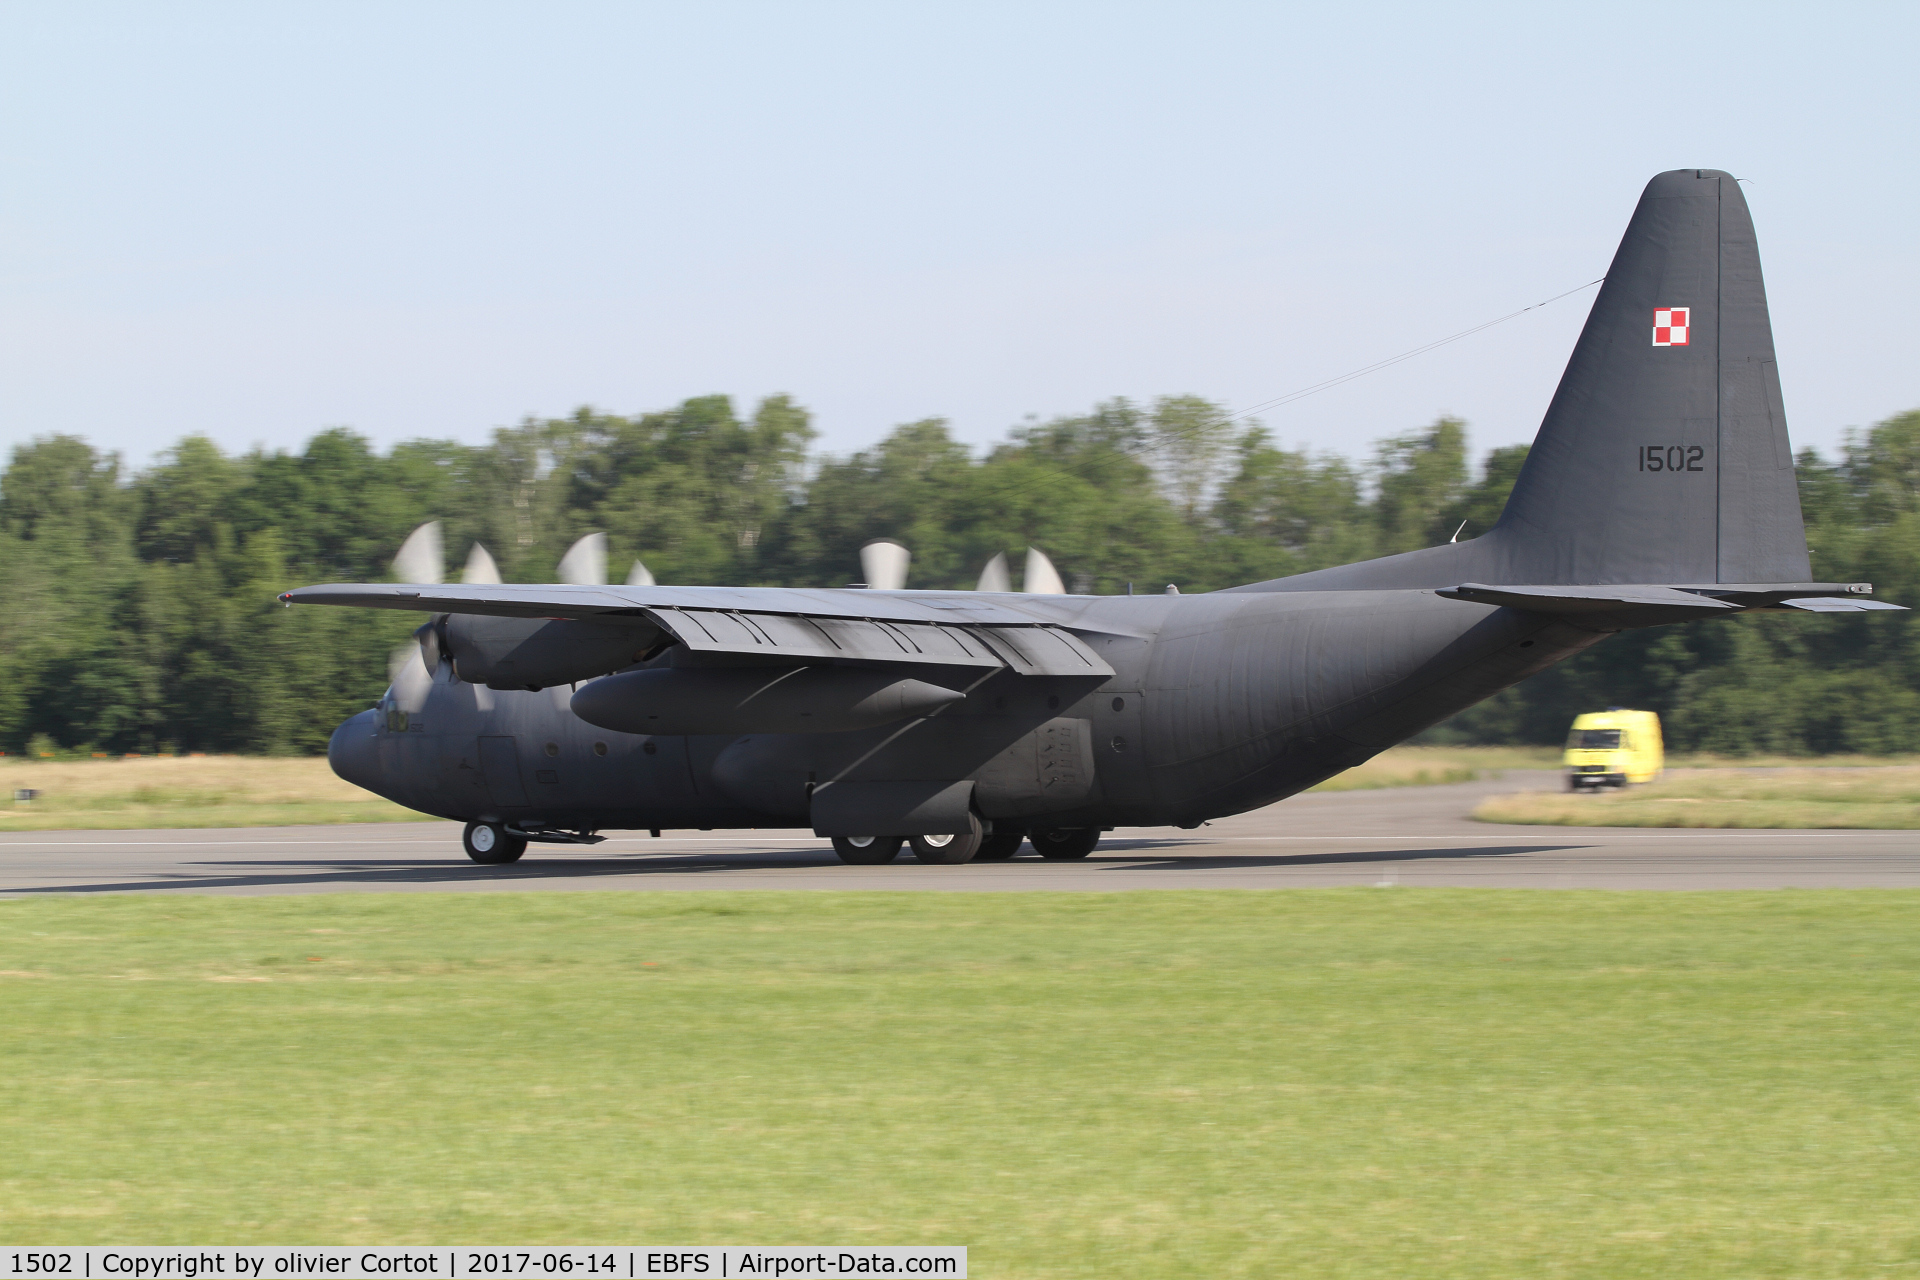 1502, 1970 Lockheed C-130E-LM Hercules C/N 382-4414, landing at Florennes, Mig-29 support aircraft